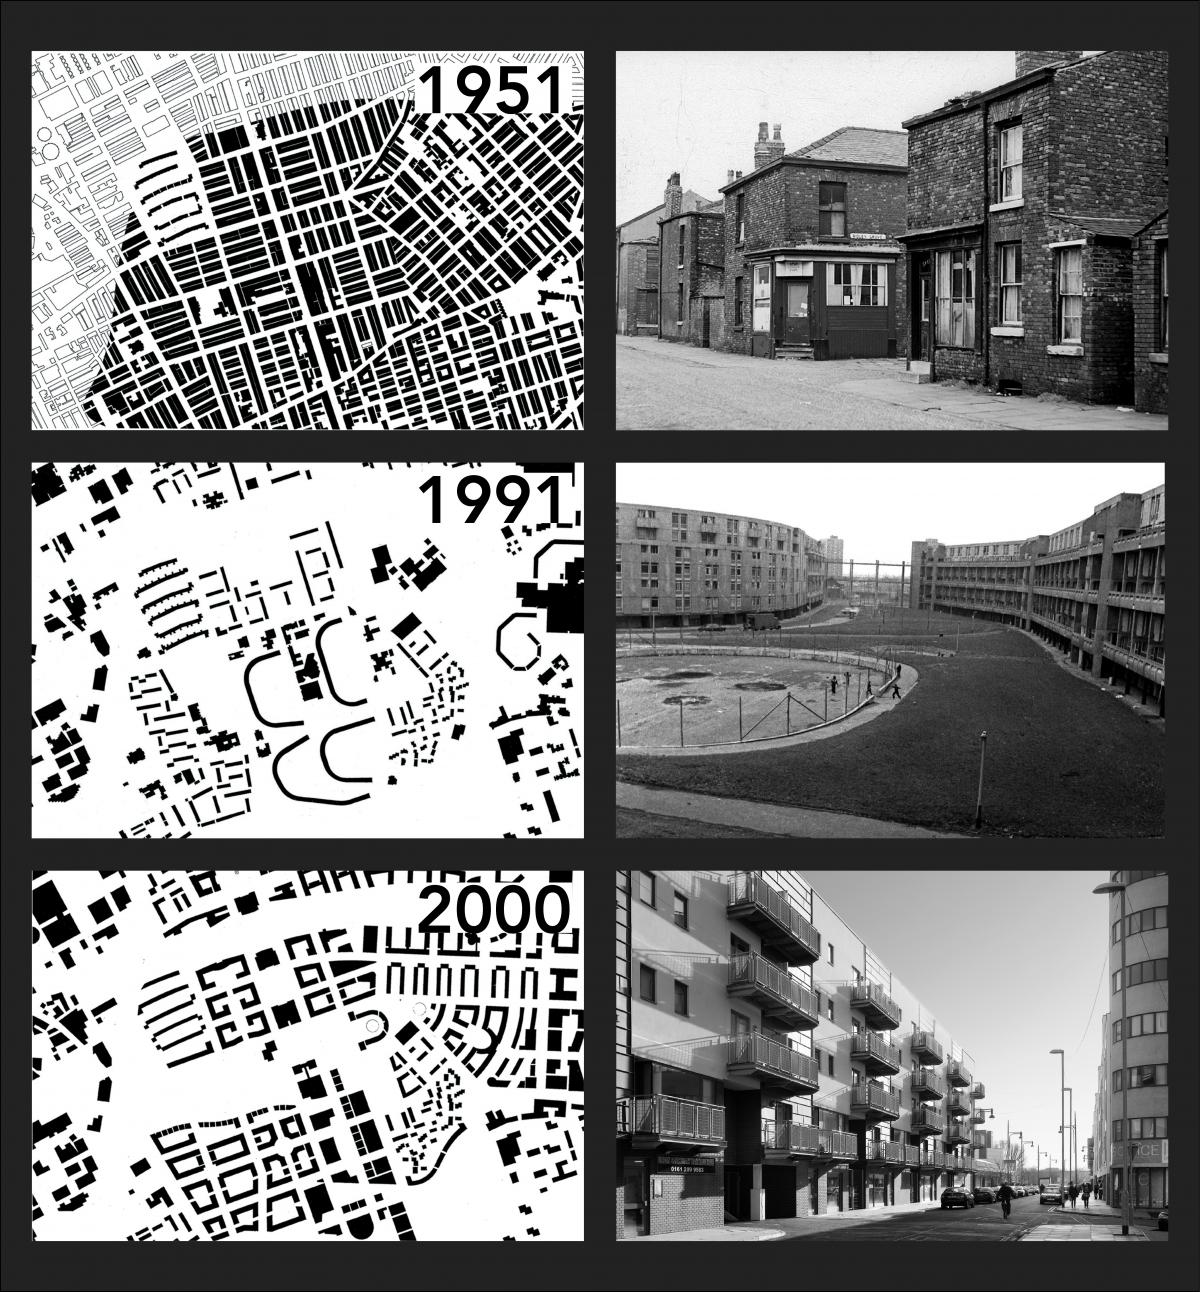 Three images showing density mapping of Hulme in 1951, 1991 and 2000.